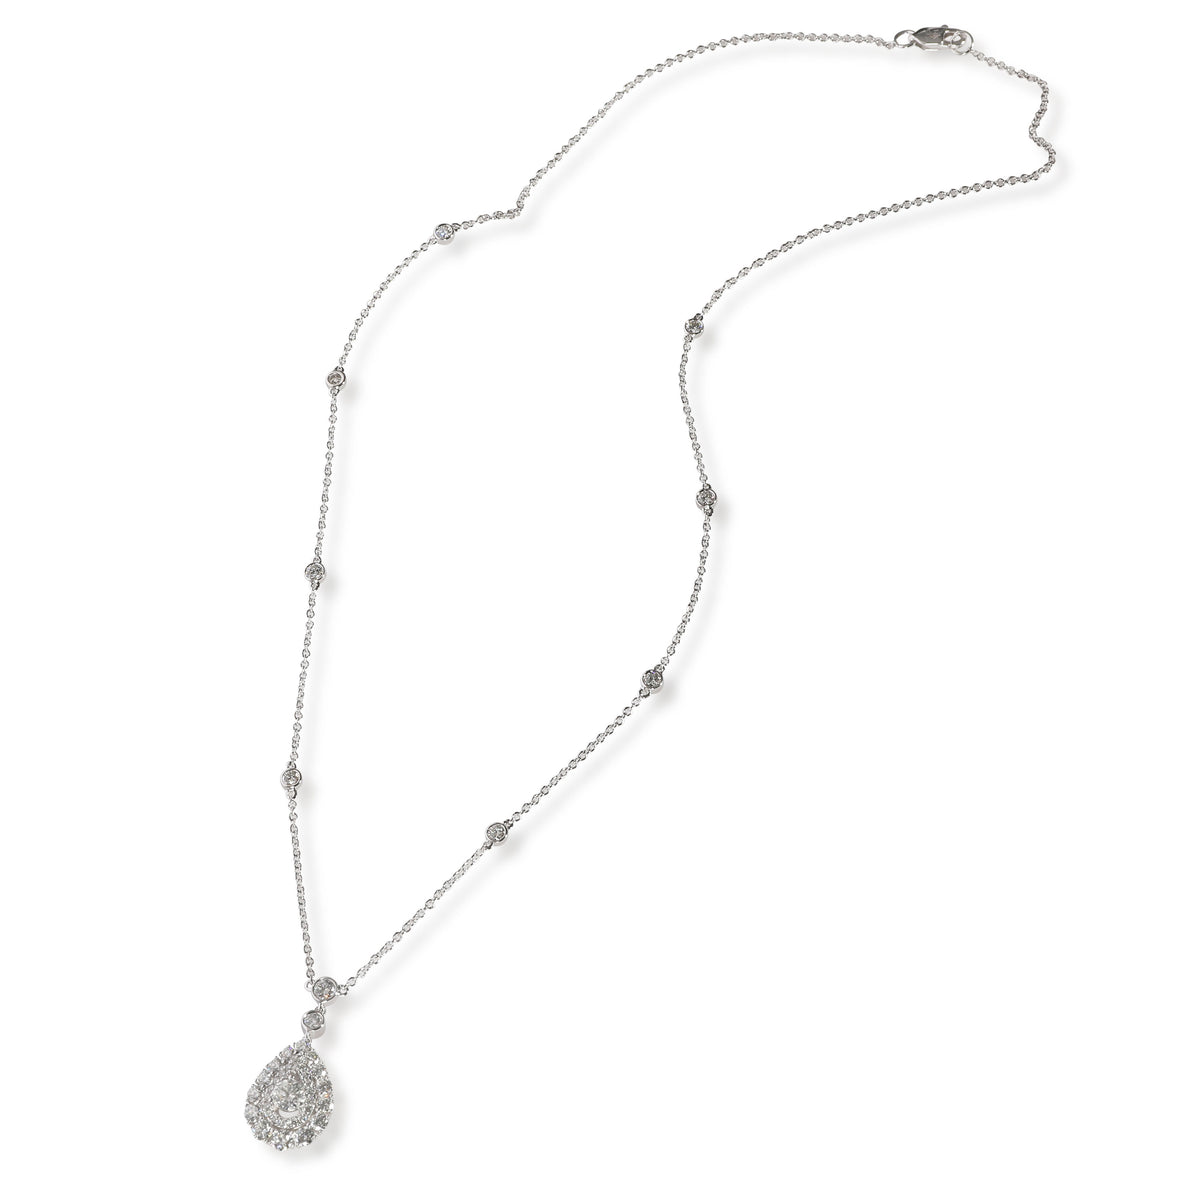 Teardrop Halo Diamond by the Yard Necklace in 14K White Gold 1.30 CTW